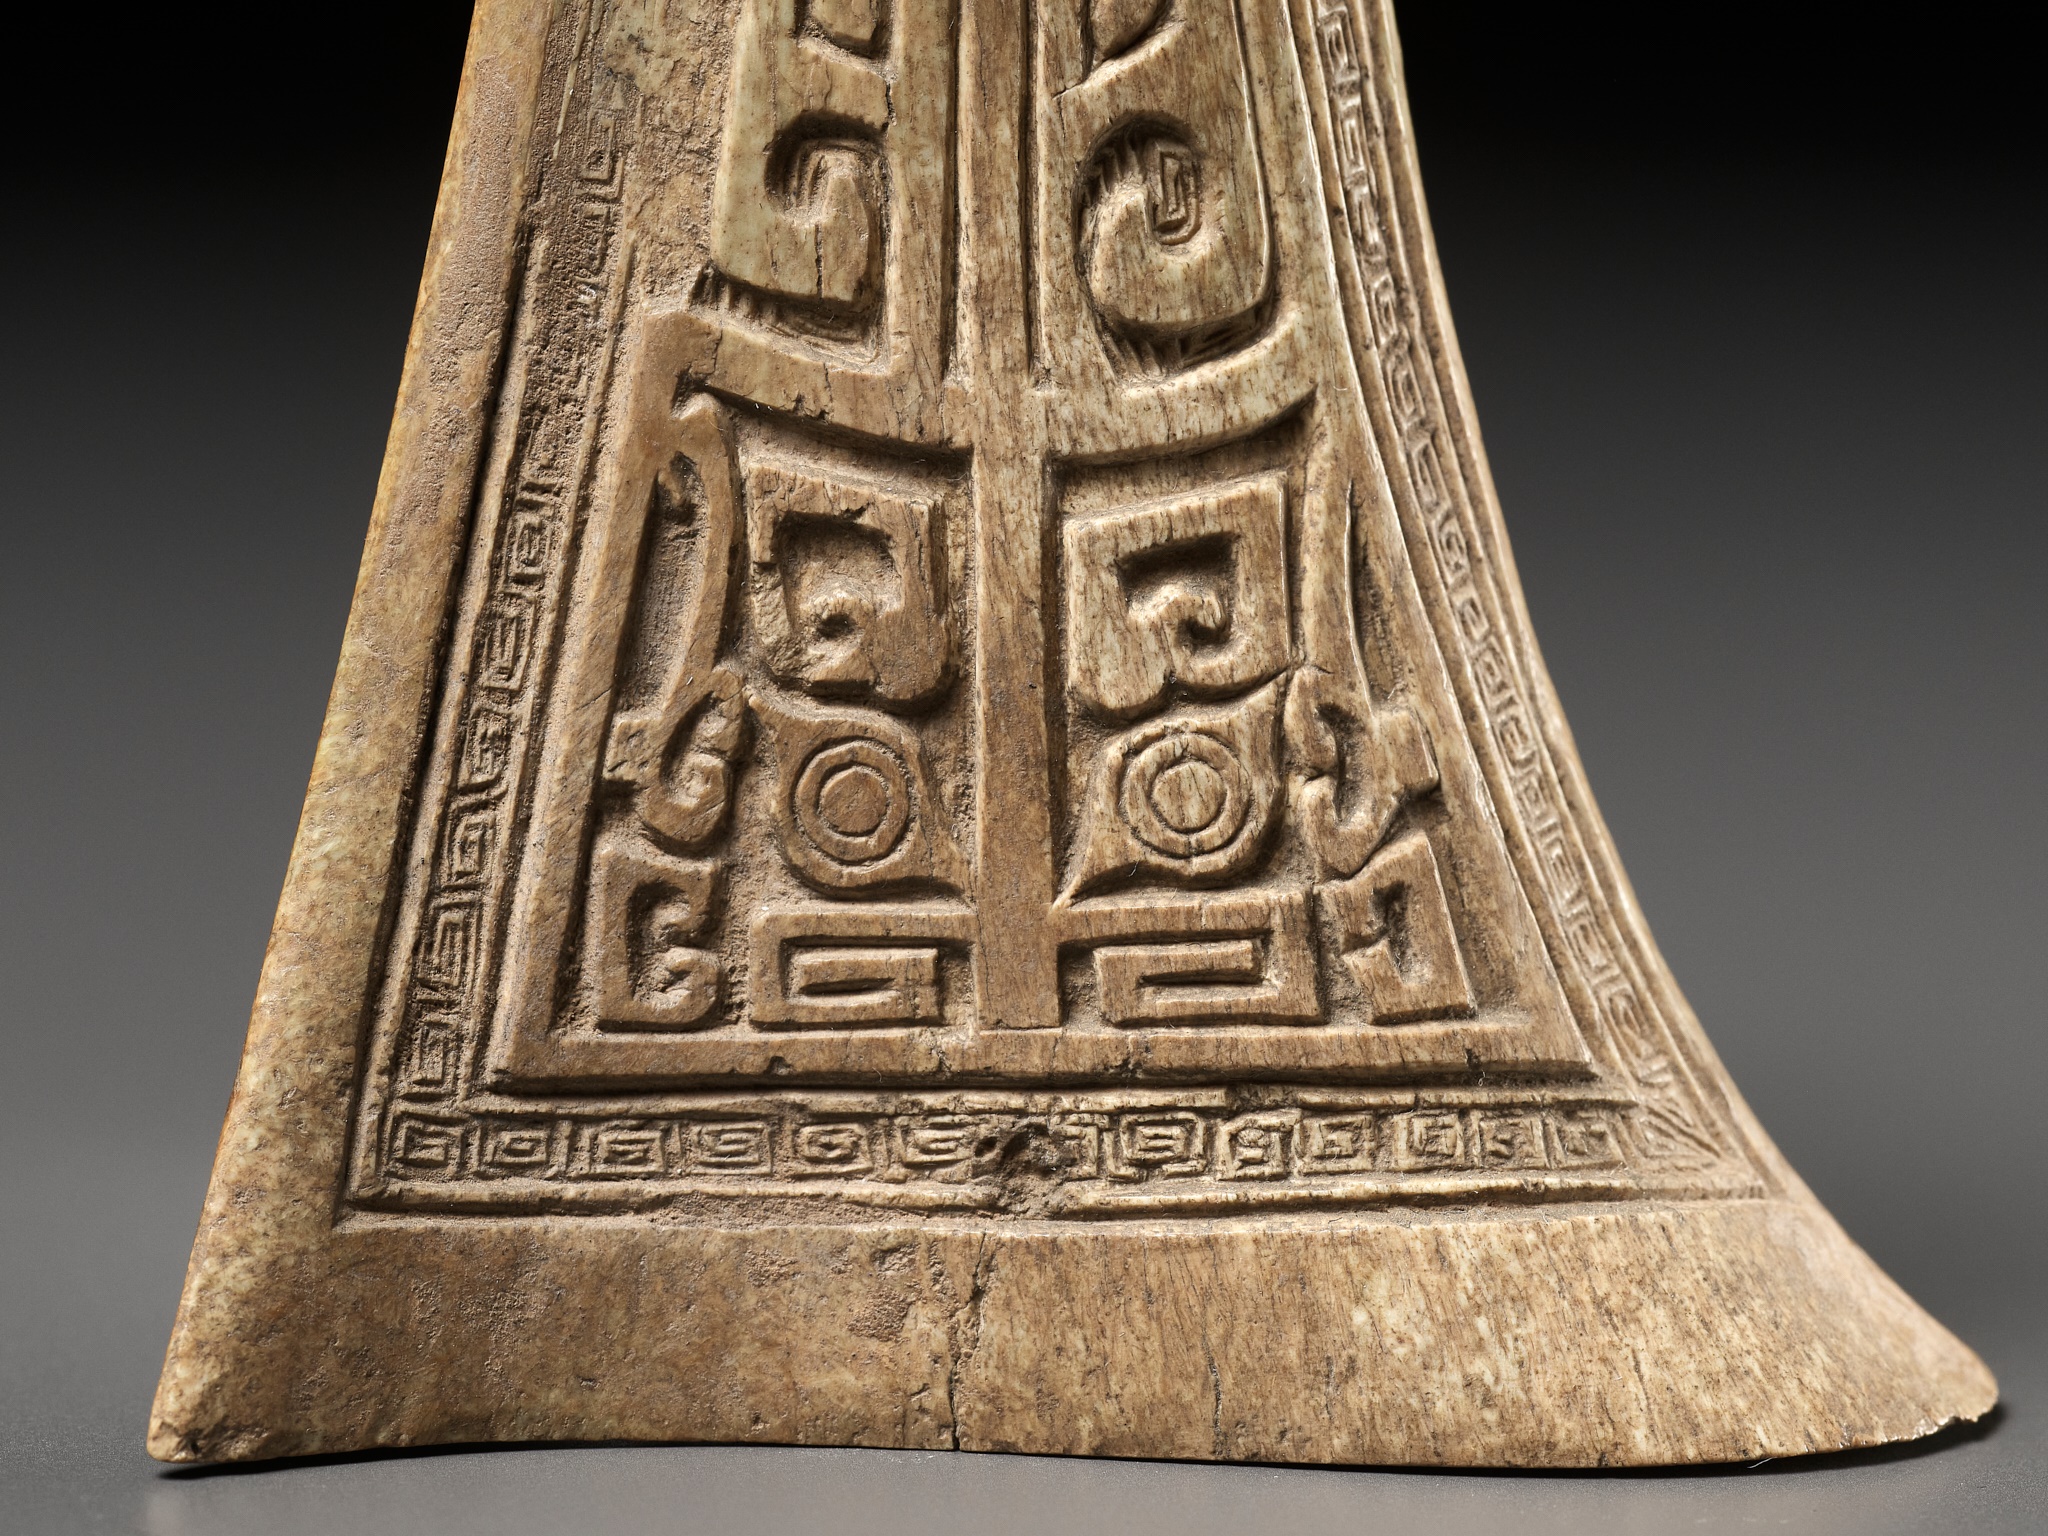 AN ARCHAIC CEREMONIAL BONE CARVING, SHANG DYNASTY - Image 13 of 16